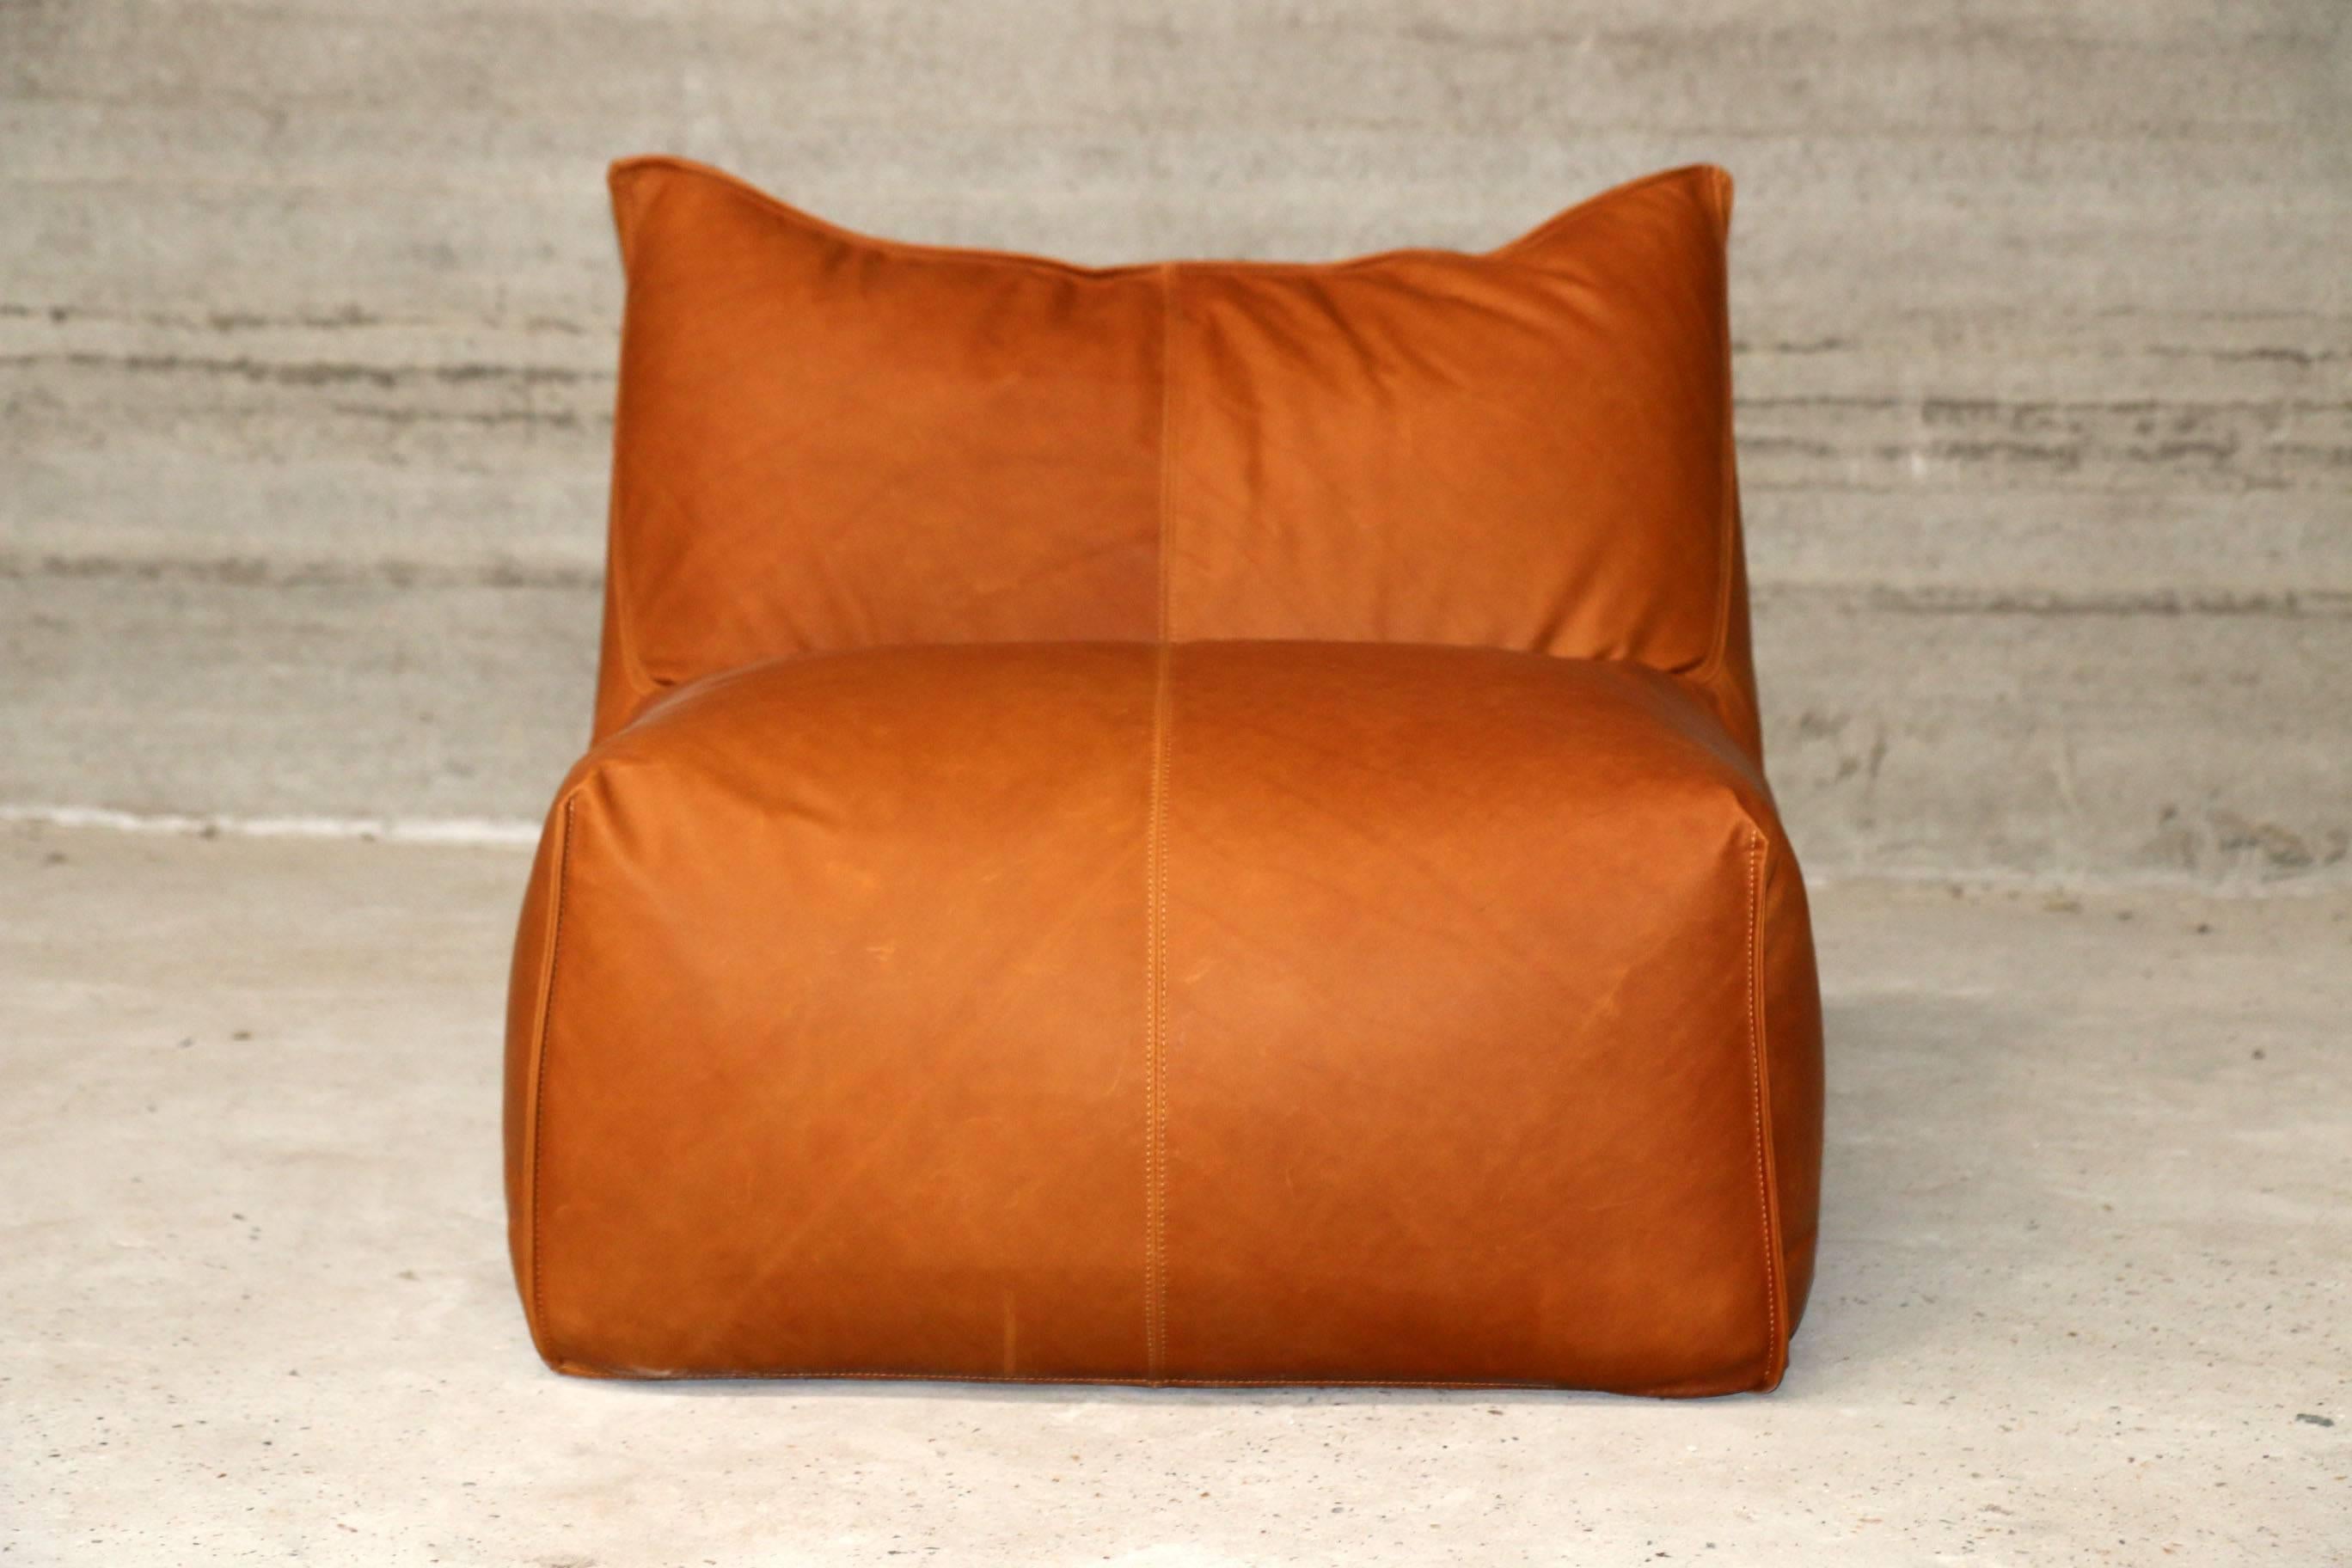 New upholstered bambole lounge chair, full grain cognac leather, no armrest, designed in 1972 by Mario Bellini.